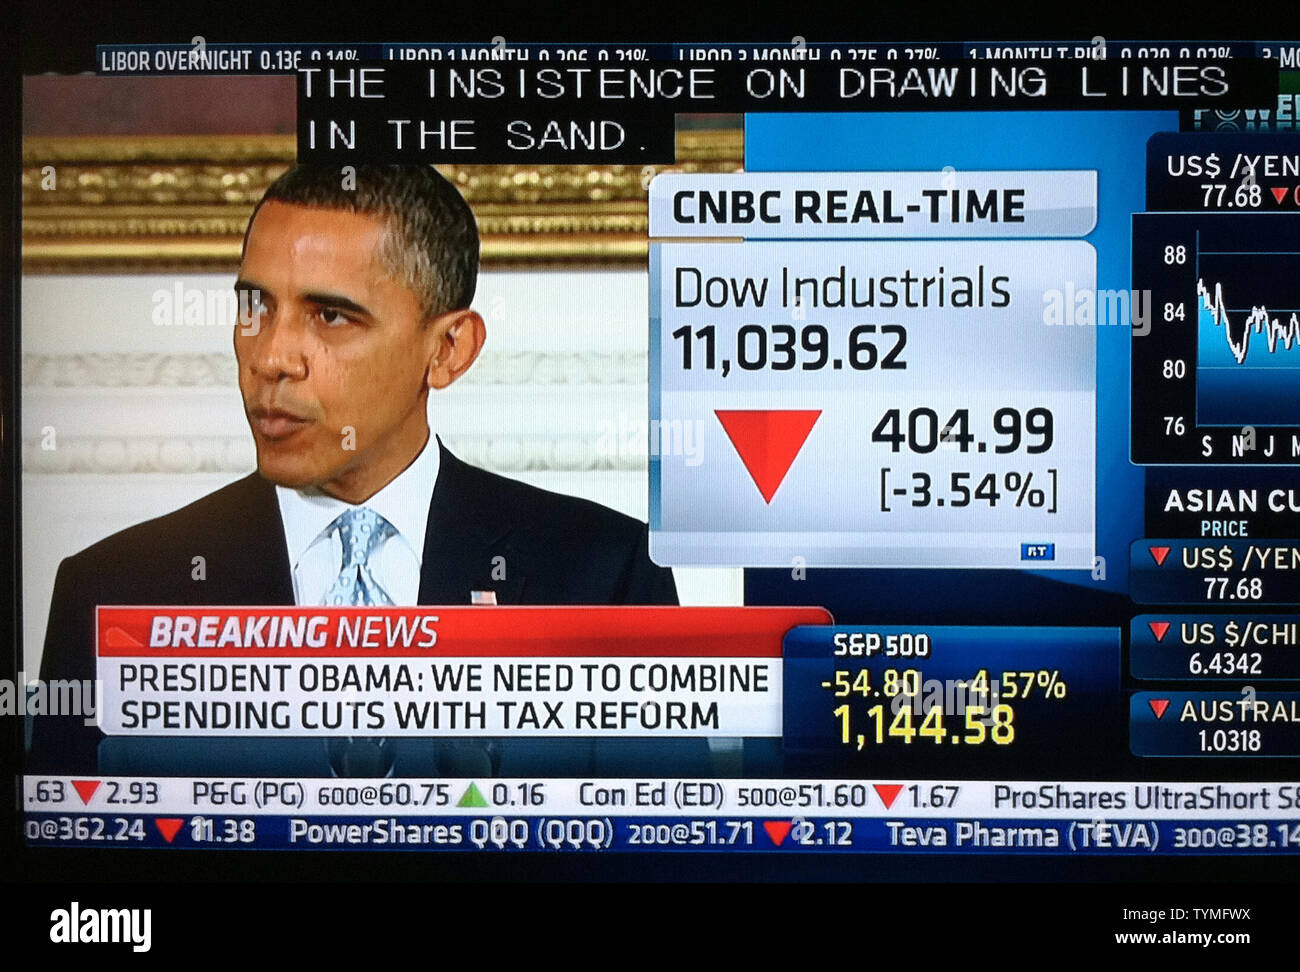 CNBC the speech of United States President Barack Obama as he speaks to the nation about the debt crisis as the Dow falls than 5% and 600 points on